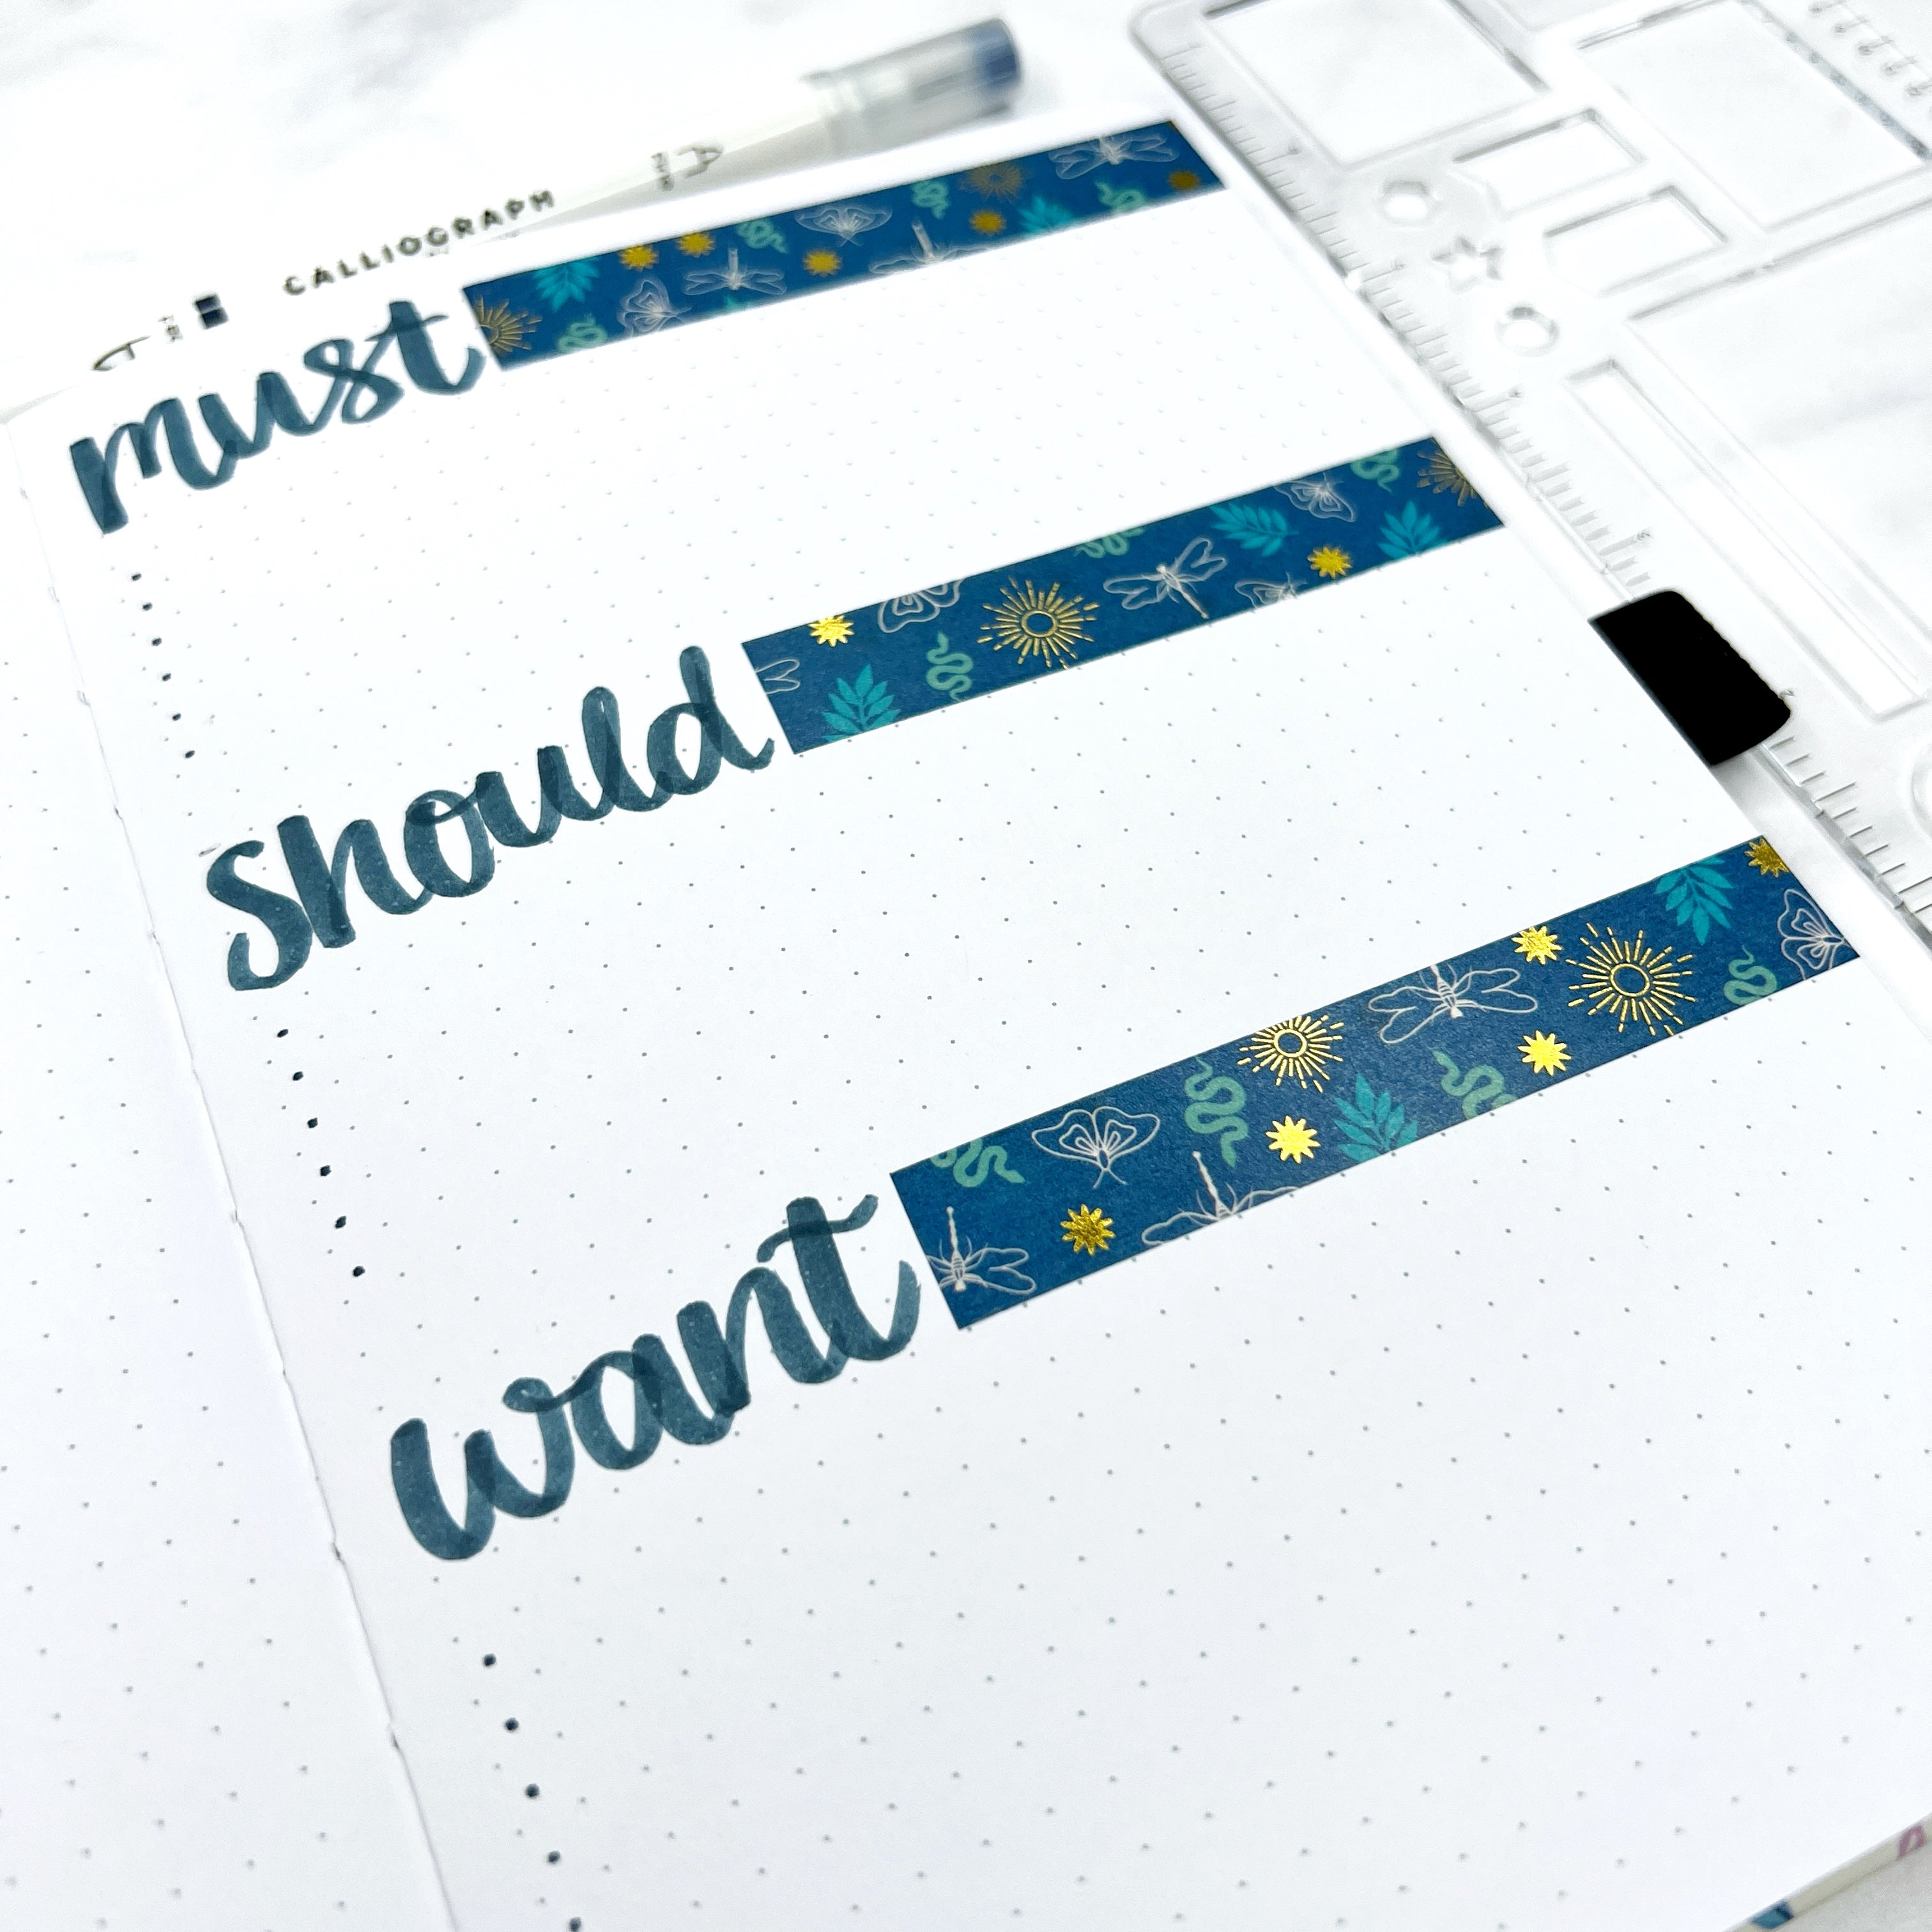 Open journal with headings must, should, could and washi tape